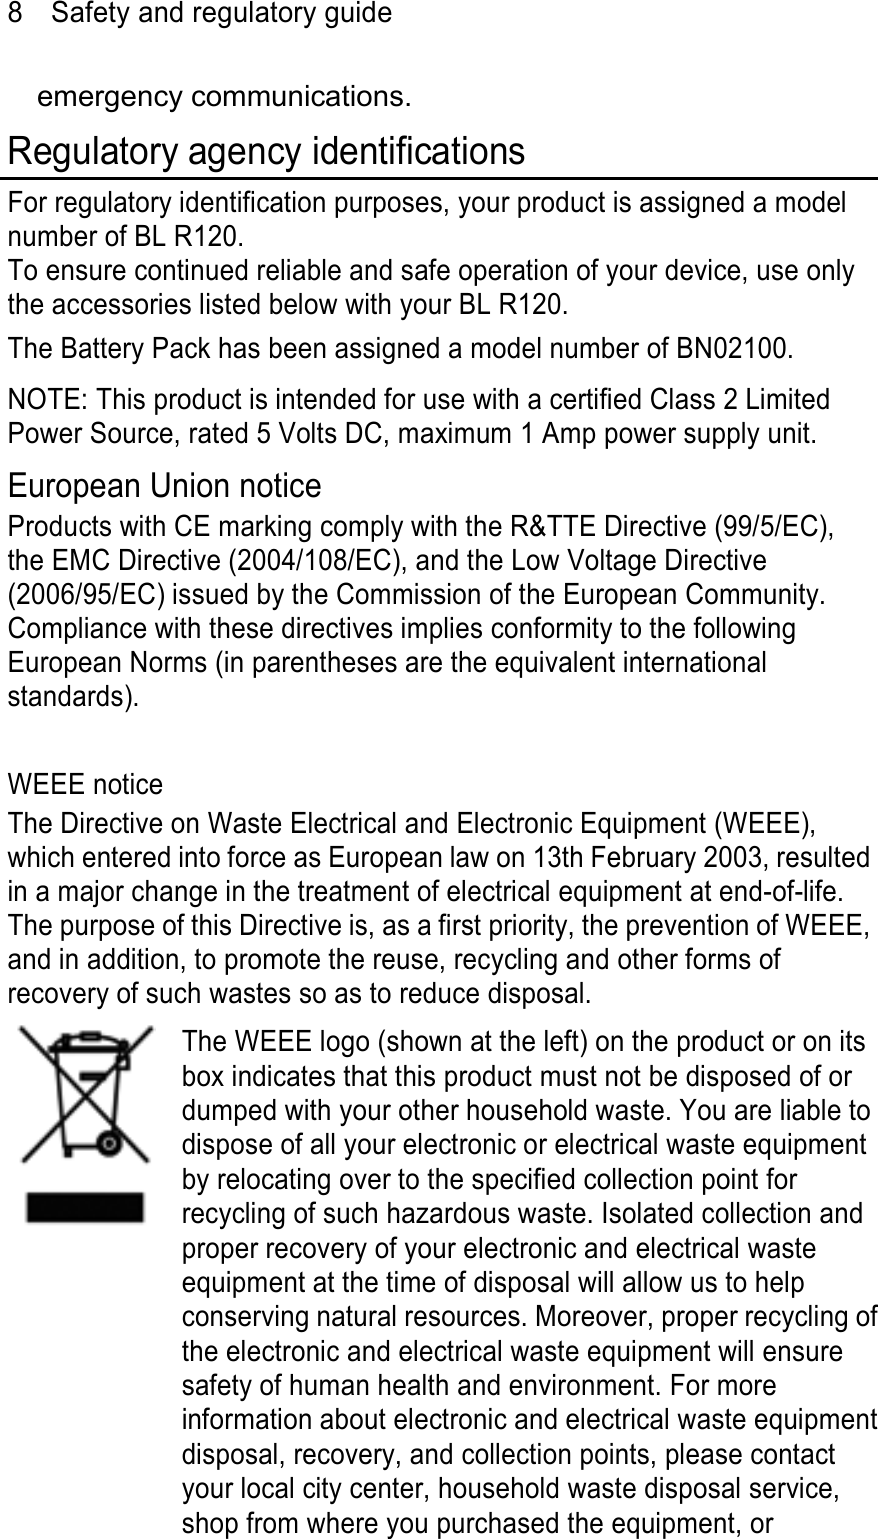 8  Safety and regulatory guide emergency communications. Regulatory agency identifications For regulatory identification purposes, your product is assigned a model number of BL R120.   To ensure continued reliable and safe operation of your device, use only the accessories listed below with your BL R120. The Battery Pack has been assigned a model number of BN02100. NOTE: This product is intended for use with a certified Class 2 Limited Power Source, rated 5 Volts DC, maximum 1 Amp power supply unit. European Union notice Products with CE marking comply with the R&amp;TTE Directive (99/5/EC), the EMC Directive (2004/108/EC), and the Low Voltage Directive (2006/95/EC) issued by the Commission of the European Community.   Compliance with these directives implies conformity to the following European Norms (in parentheses are the equivalent international standards).  WEEE notice The Directive on Waste Electrical and Electronic Equipment (WEEE), which entered into force as European law on 13th February 2003, resulted in a major change in the treatment of electrical equipment at end-of-life.   The purpose of this Directive is, as a first priority, the prevention of WEEE, and in addition, to promote the reuse, recycling and other forms of recovery of such wastes so as to reduce disposal.   The WEEE logo (shown at the left) on the product or on its box indicates that this product must not be disposed of or dumped with your other household waste. You are liable to dispose of all your electronic or electrical waste equipment by relocating over to the specified collection point for recycling of such hazardous waste. Isolated collection and proper recovery of your electronic and electrical waste equipment at the time of disposal will allow us to help conserving natural resources. Moreover, proper recycling ofthe electronic and electrical waste equipment will ensure safety of human health and environment. For more information about electronic and electrical waste equipmentdisposal, recovery, and collection points, please contact your local city center, household waste disposal service, shop from where you purchased the equipment, or 